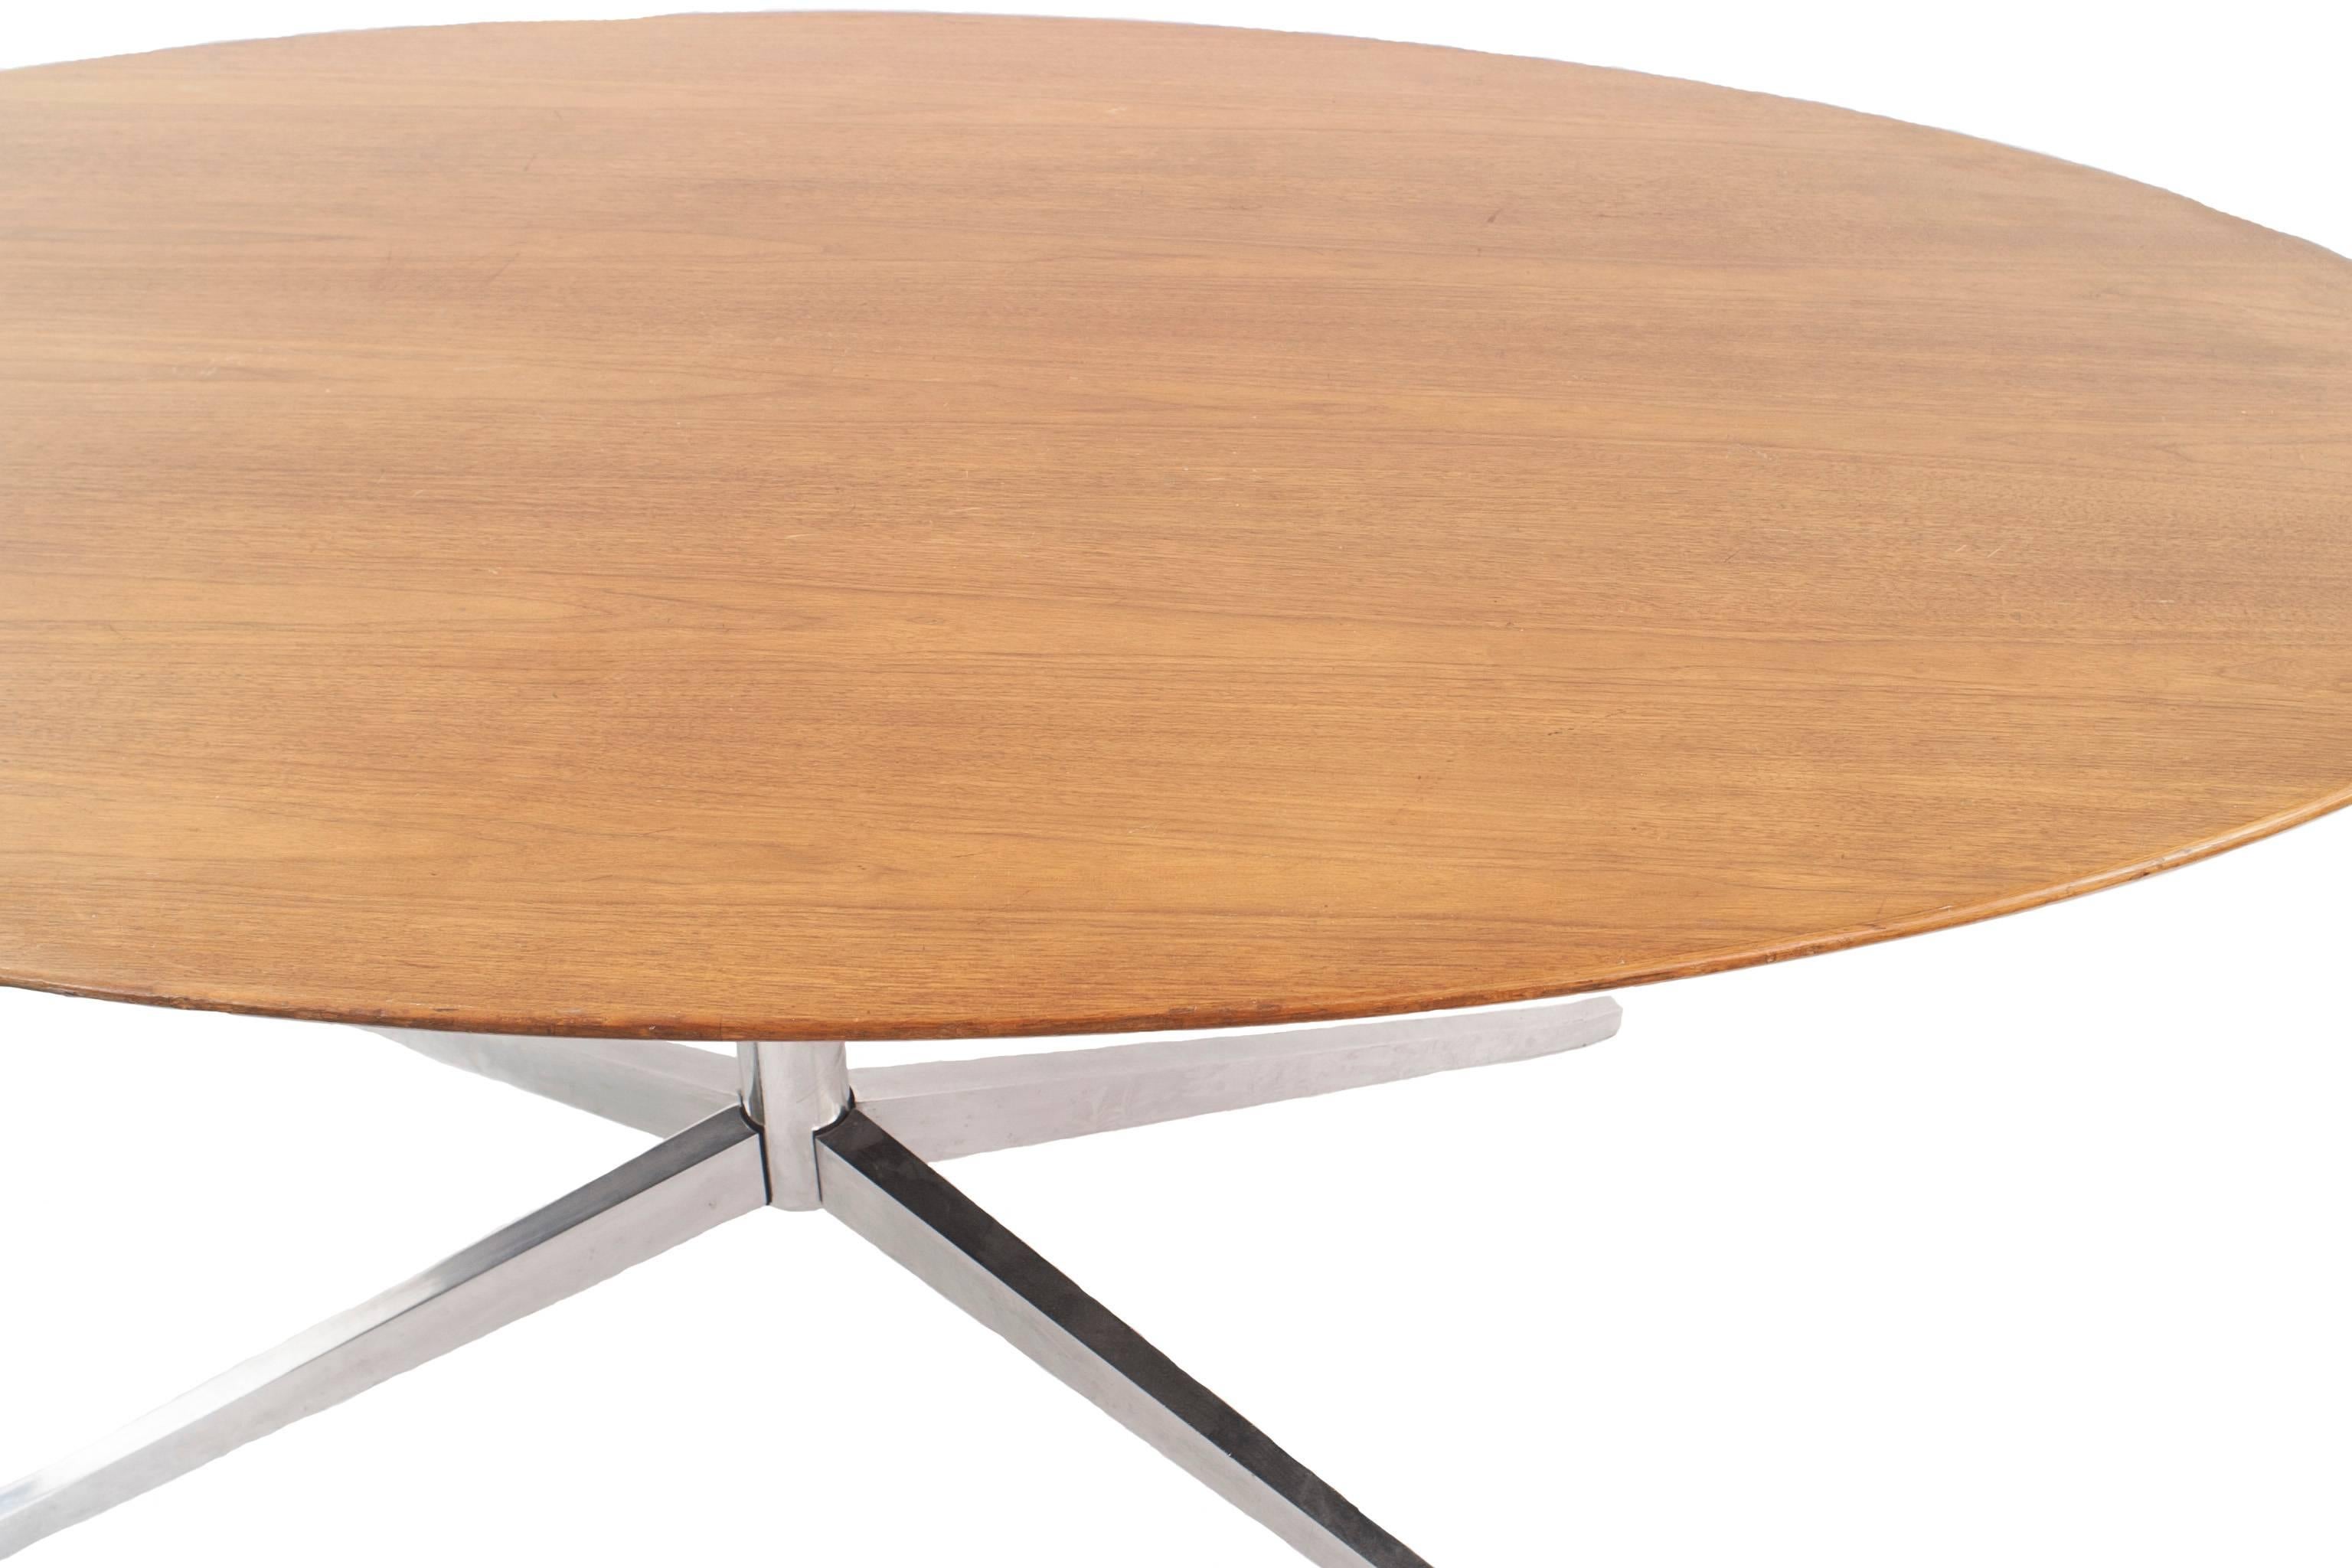 Midcentury American teak oval dining table supported with a silver metal pedestal base (Florence Knoll).


In creating the revolutionary Knoll Planning Unit, Florence Knoll defined the standard for the modern corporate interiors of post-war America.